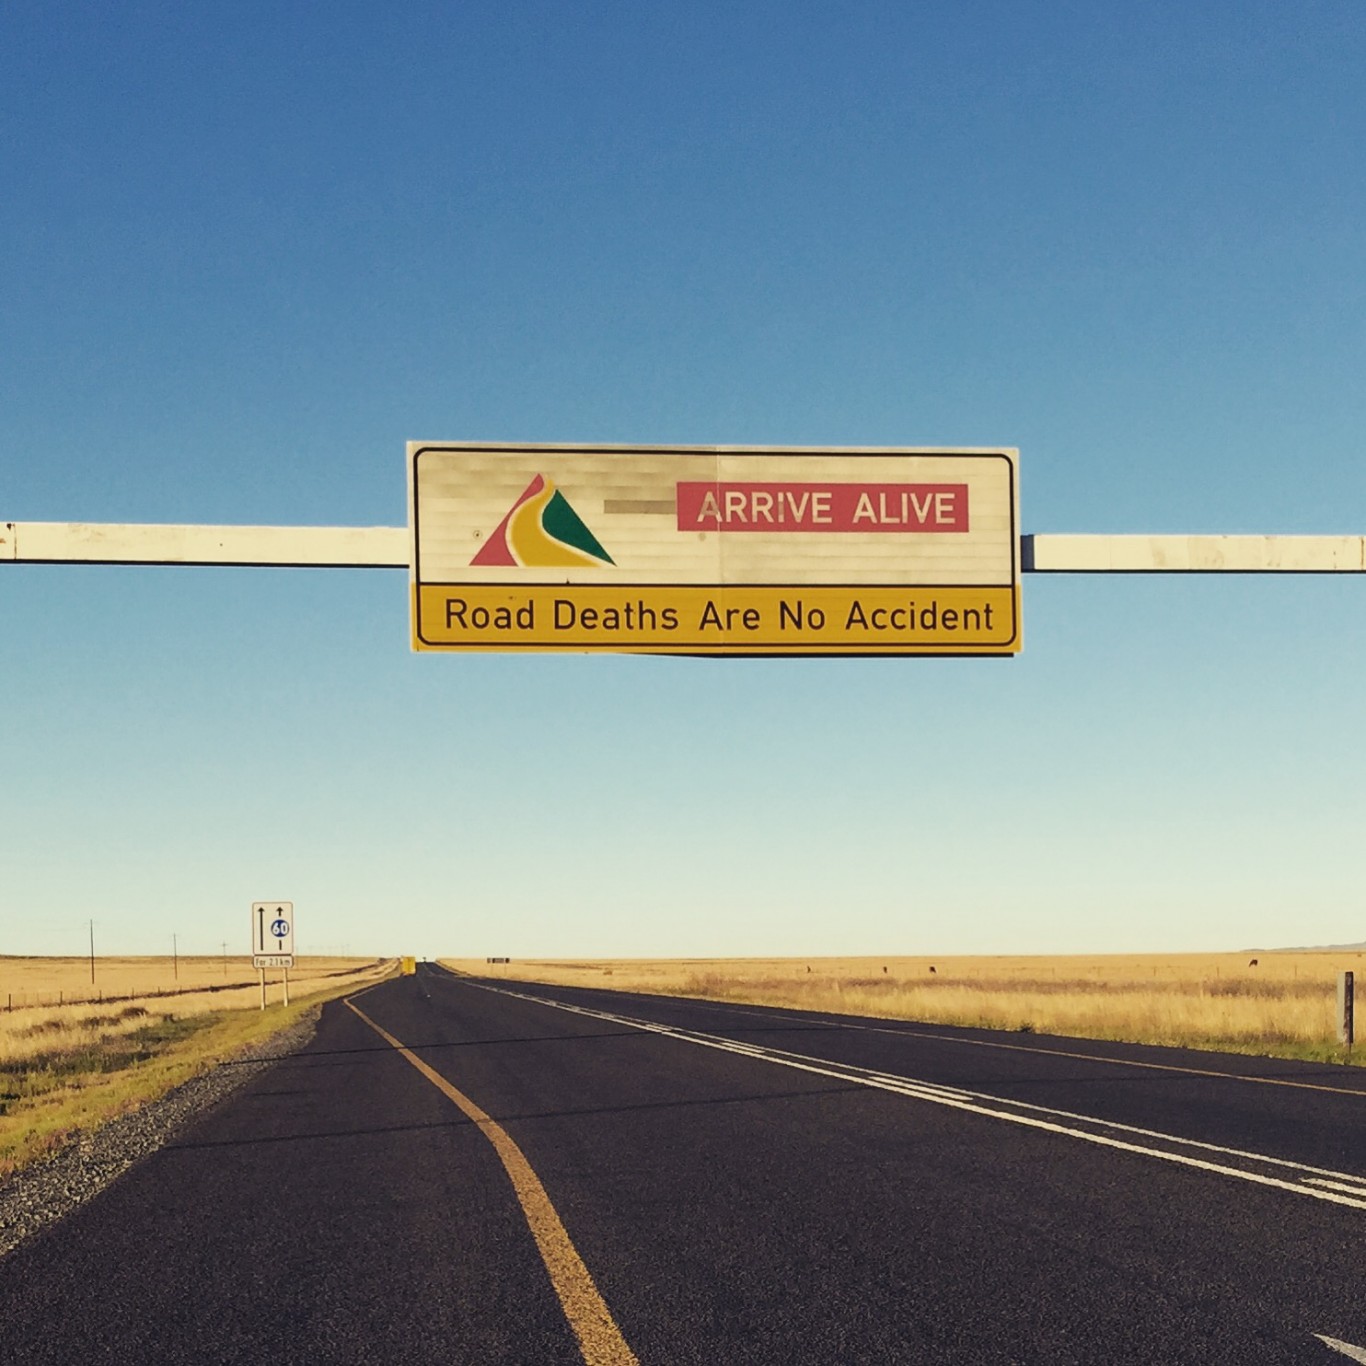 Why is it important to obey the laws that govern South Africa's roads?